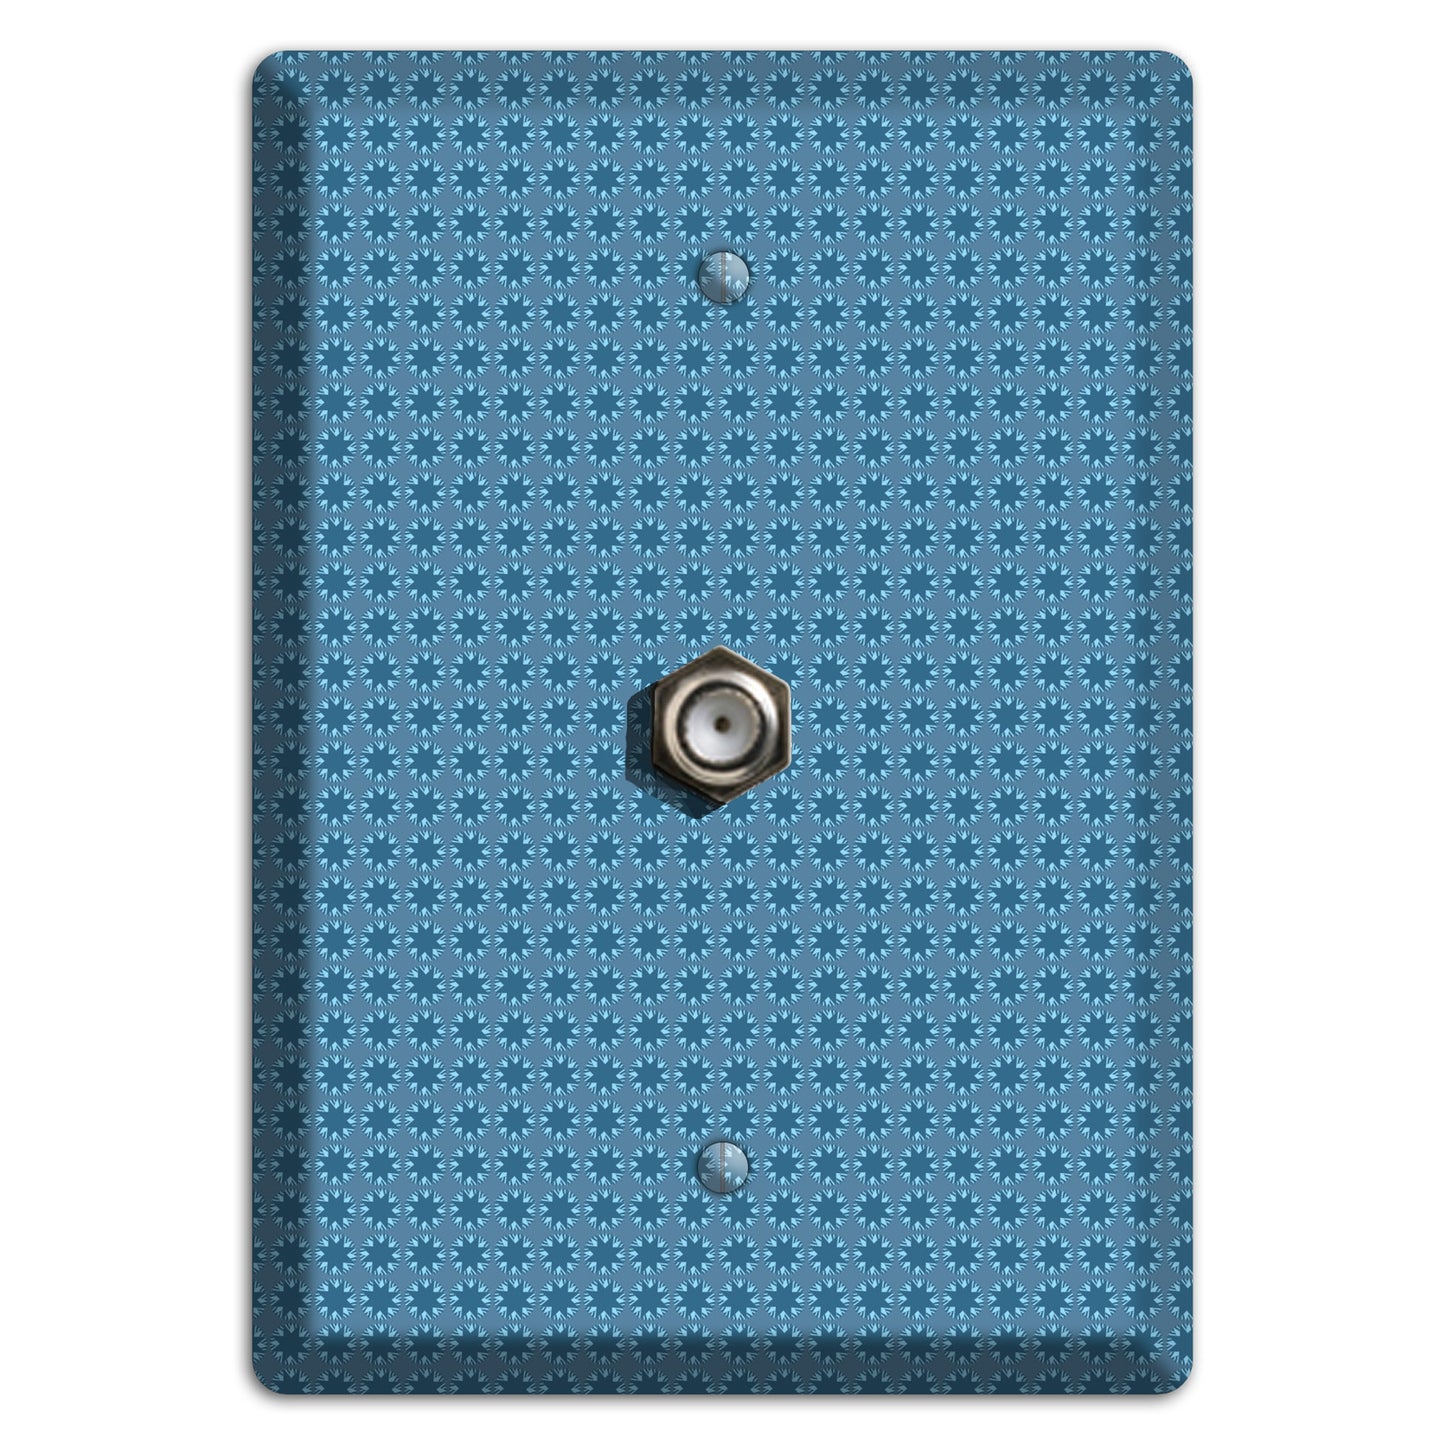 Multi Blue Tiled Foulard Cable Wallplate